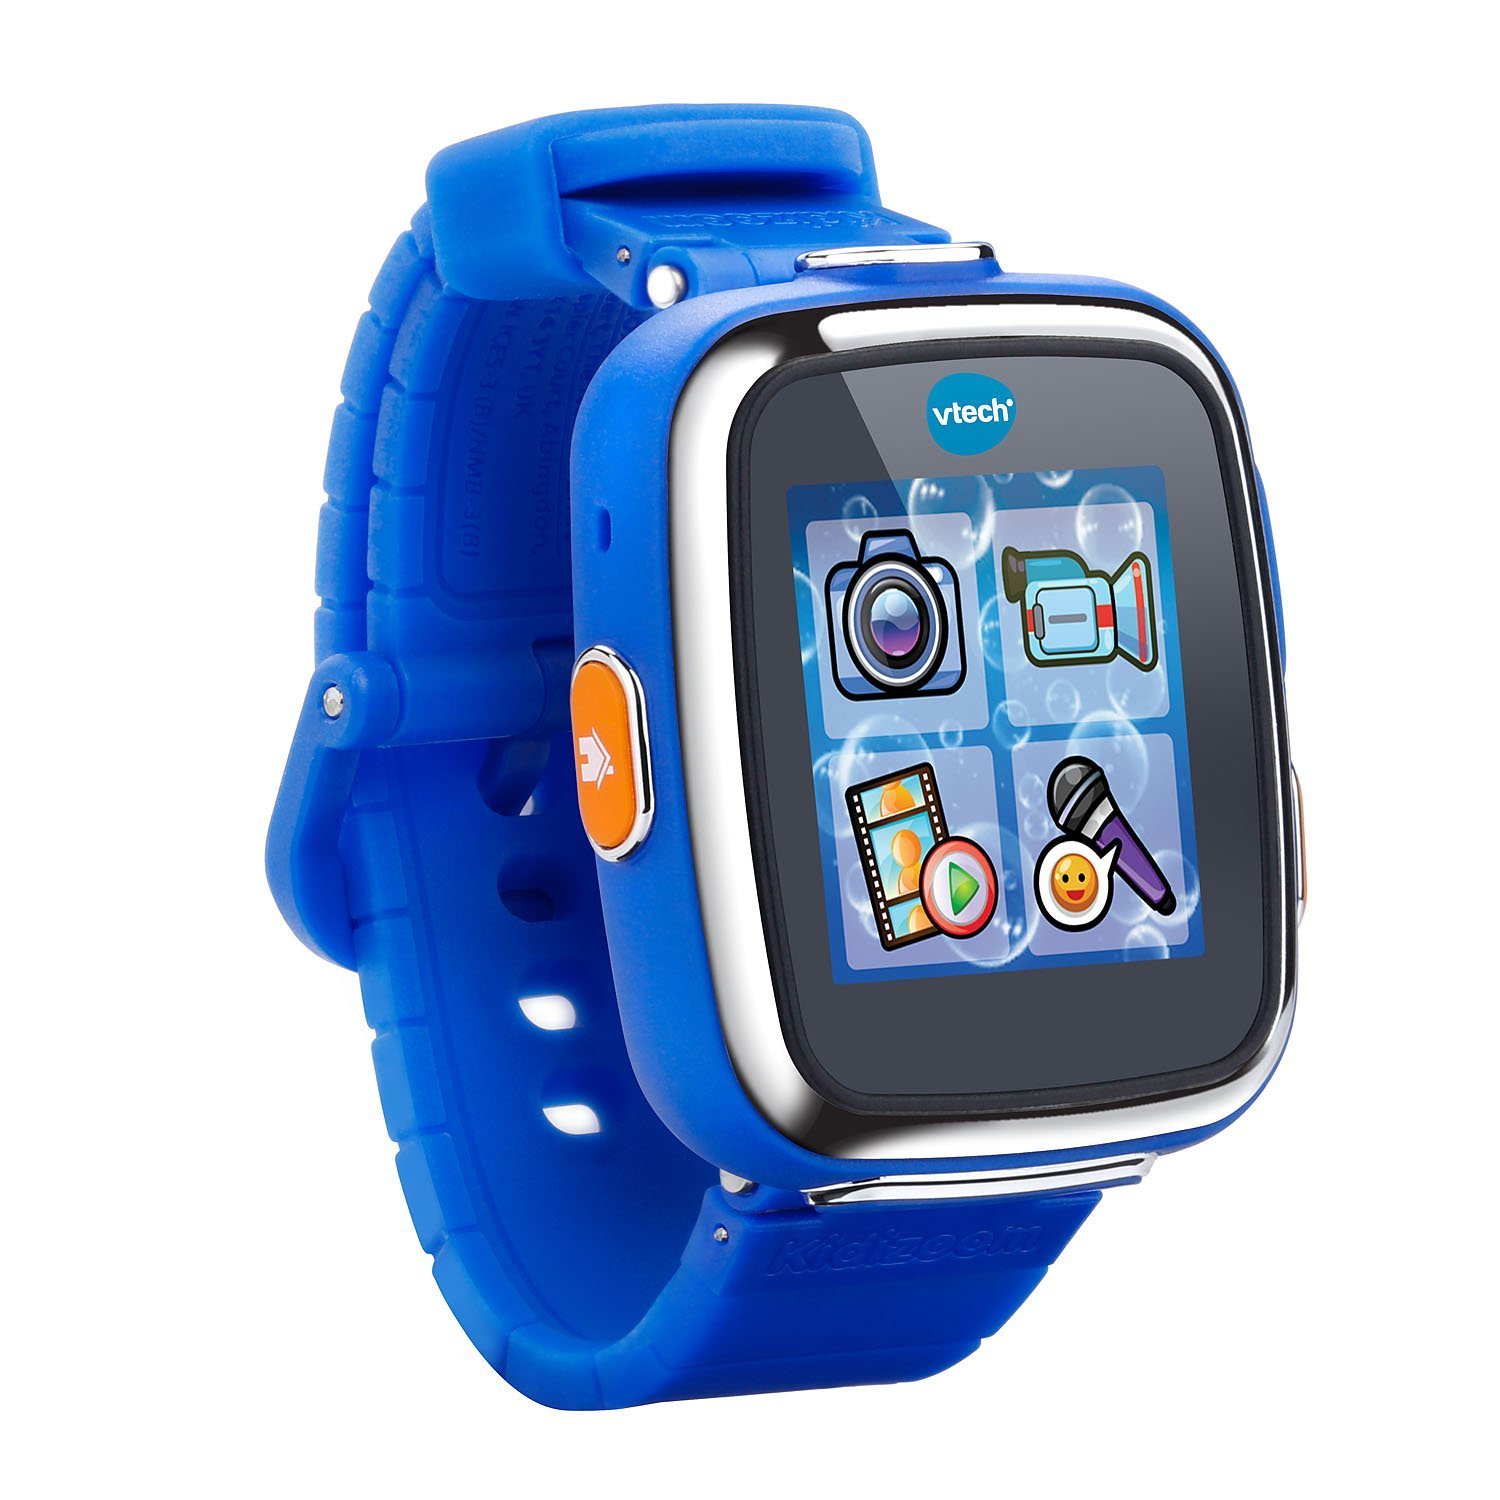 What is the best smartwatch for a kid